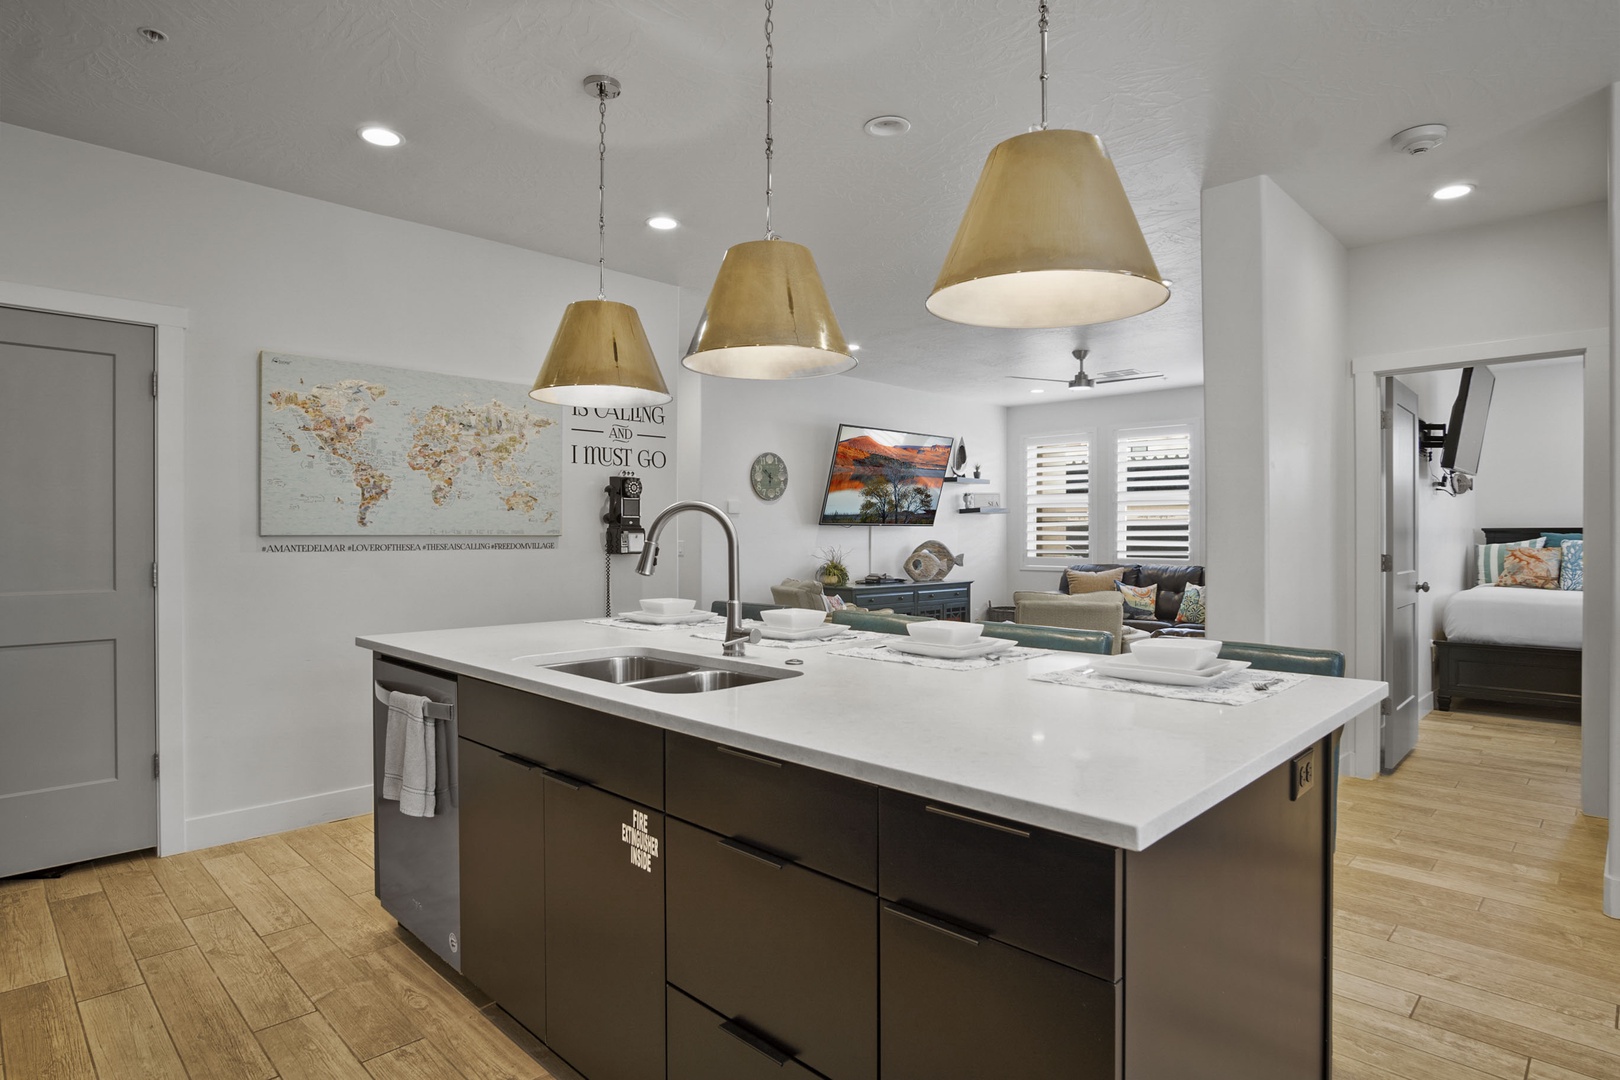 The spacious, modern kitchen offers fantastic amenities and ample seating options